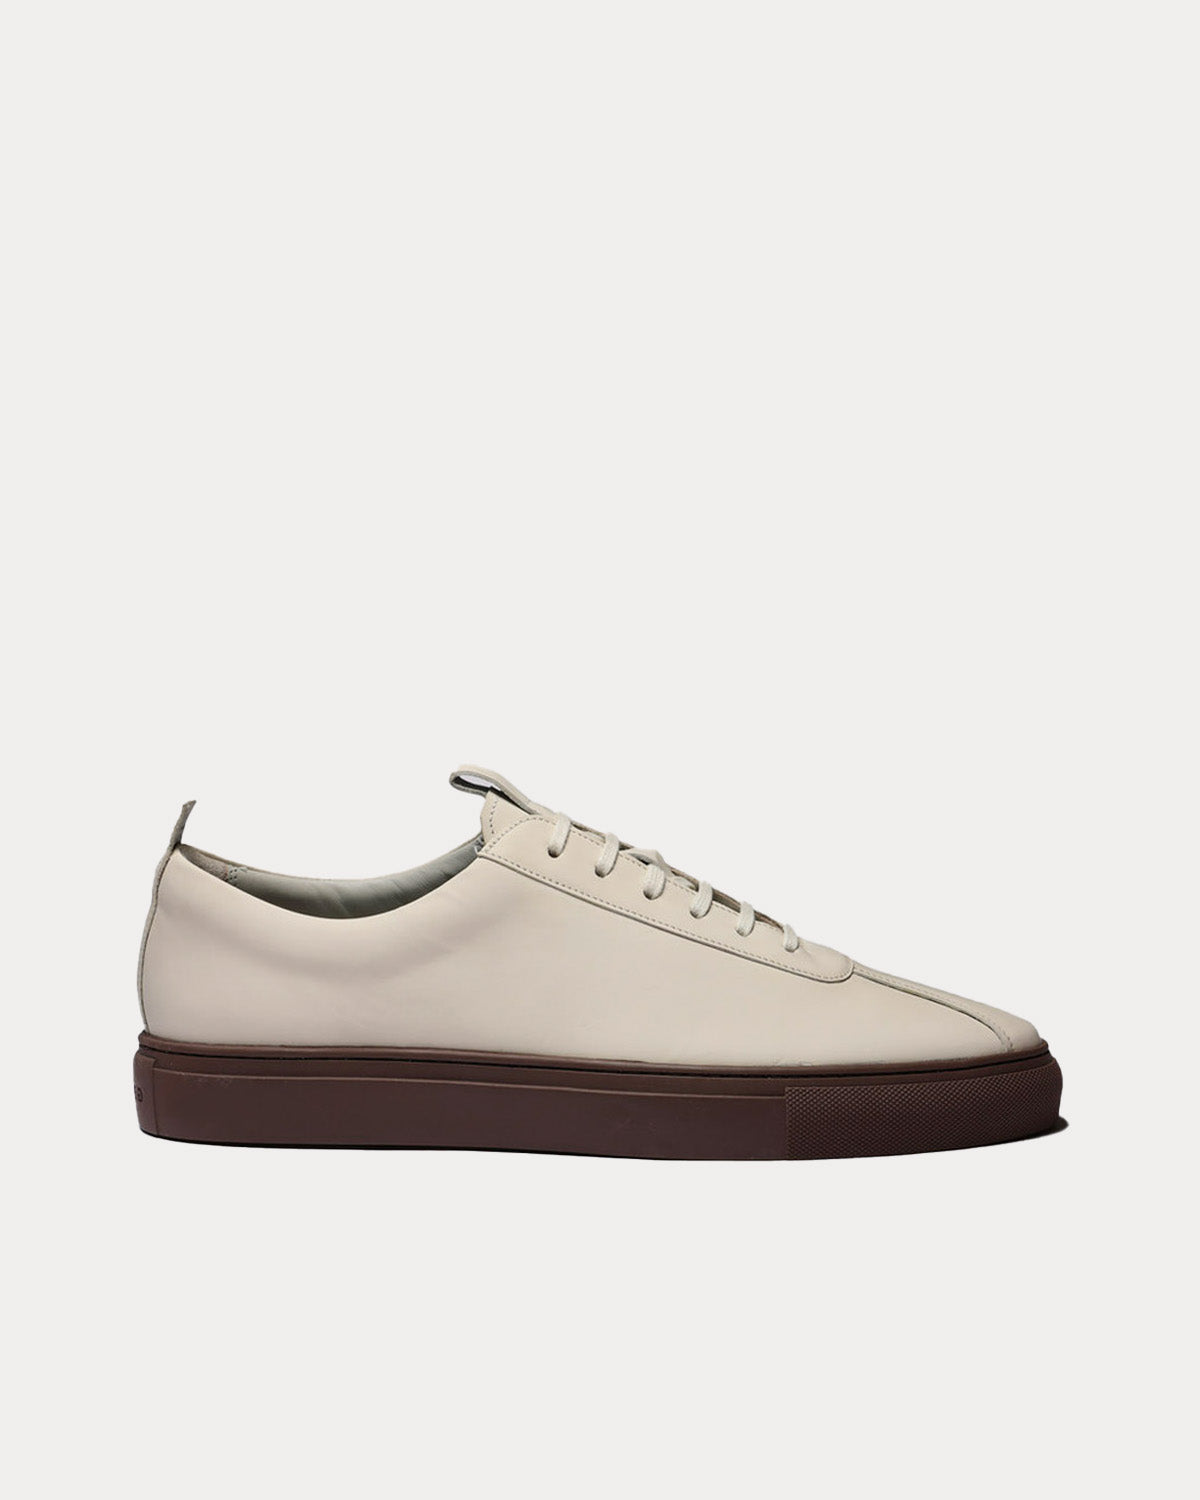 Grenson - Sneaker 1 Rubberised Leather Off-White Low Top Sneakers